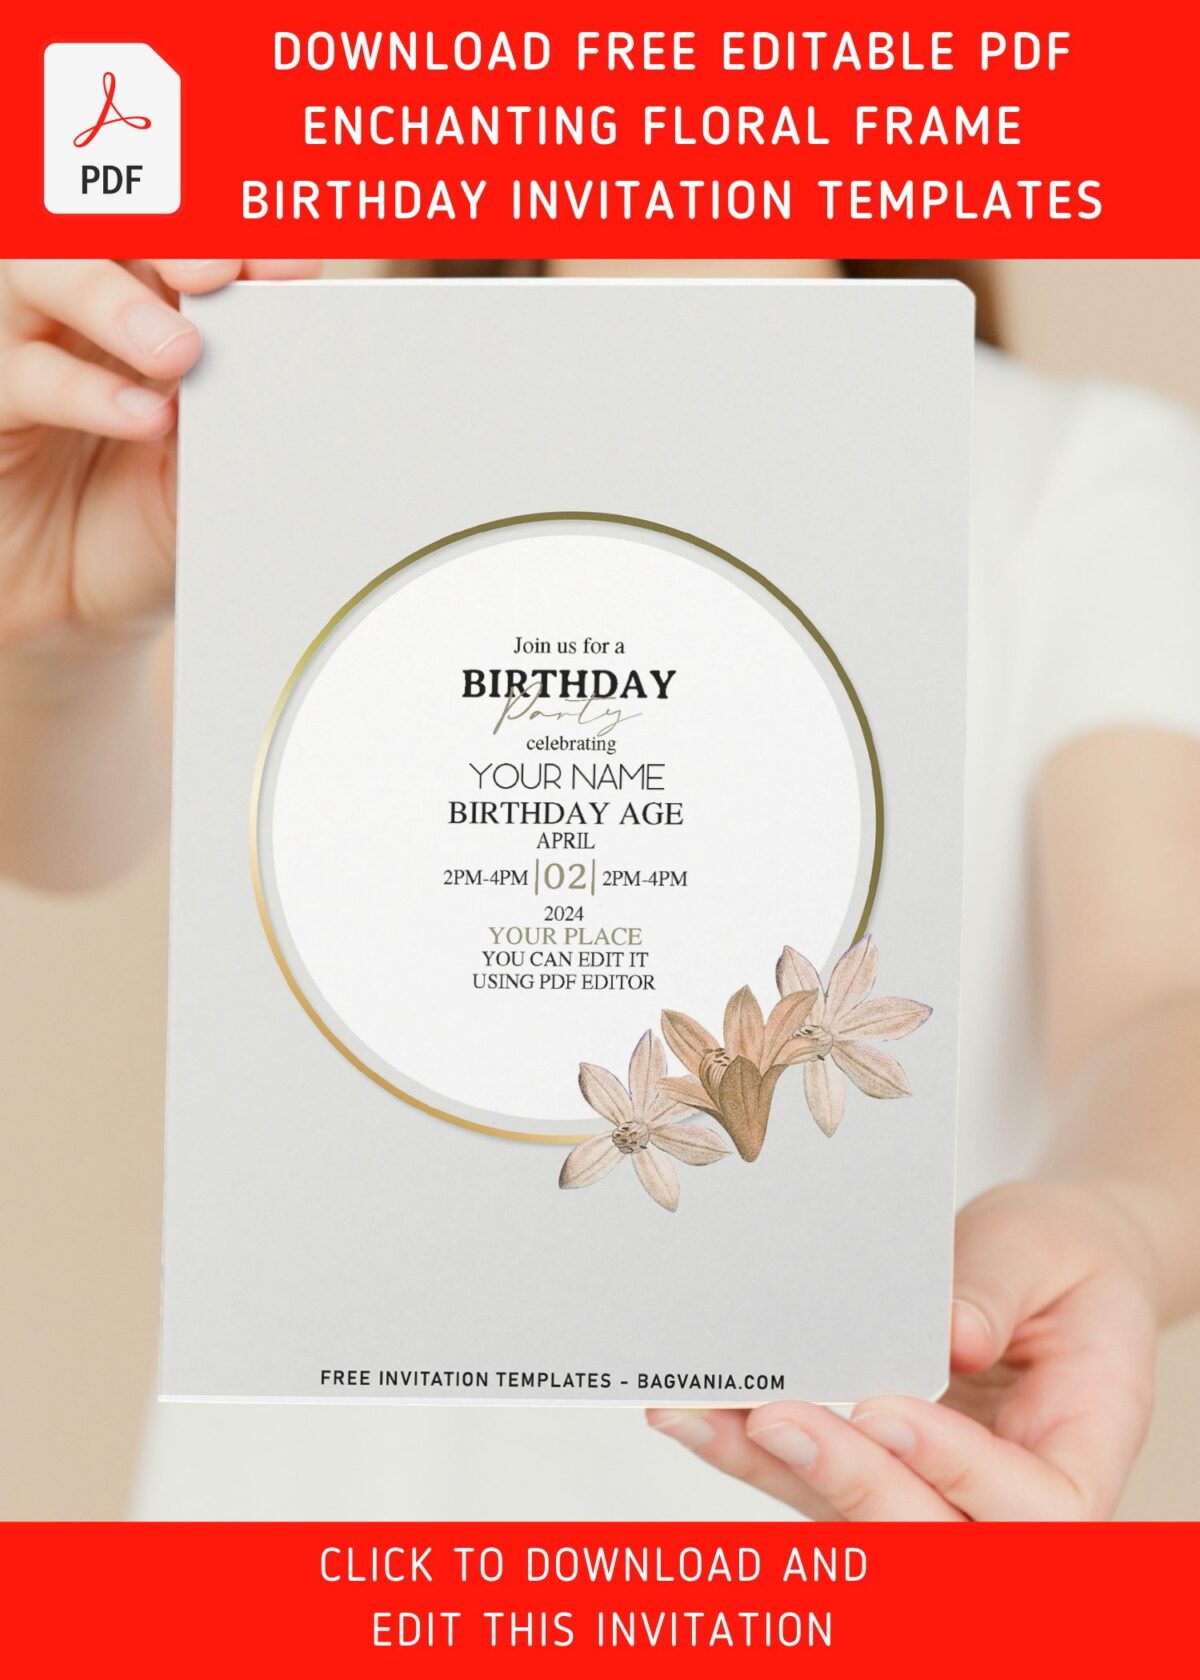 (Free Editable PDF) Attractive Floral Frame Birthday Invitation Templates with 